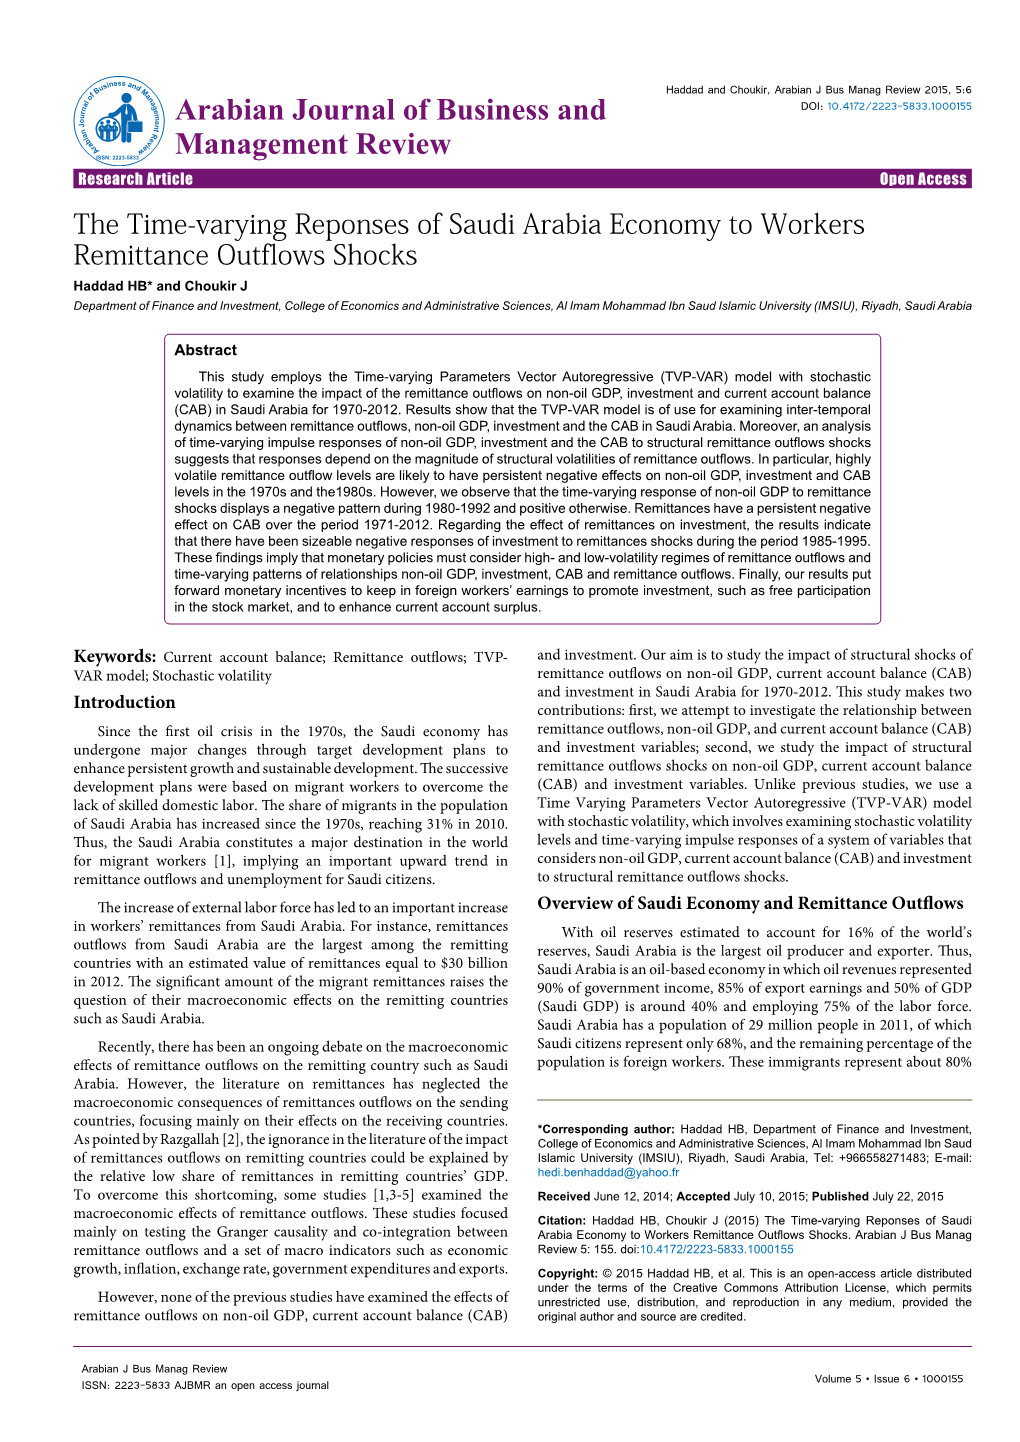 The Time-Varying Reponses of Saudi Arabia Economy to Workers